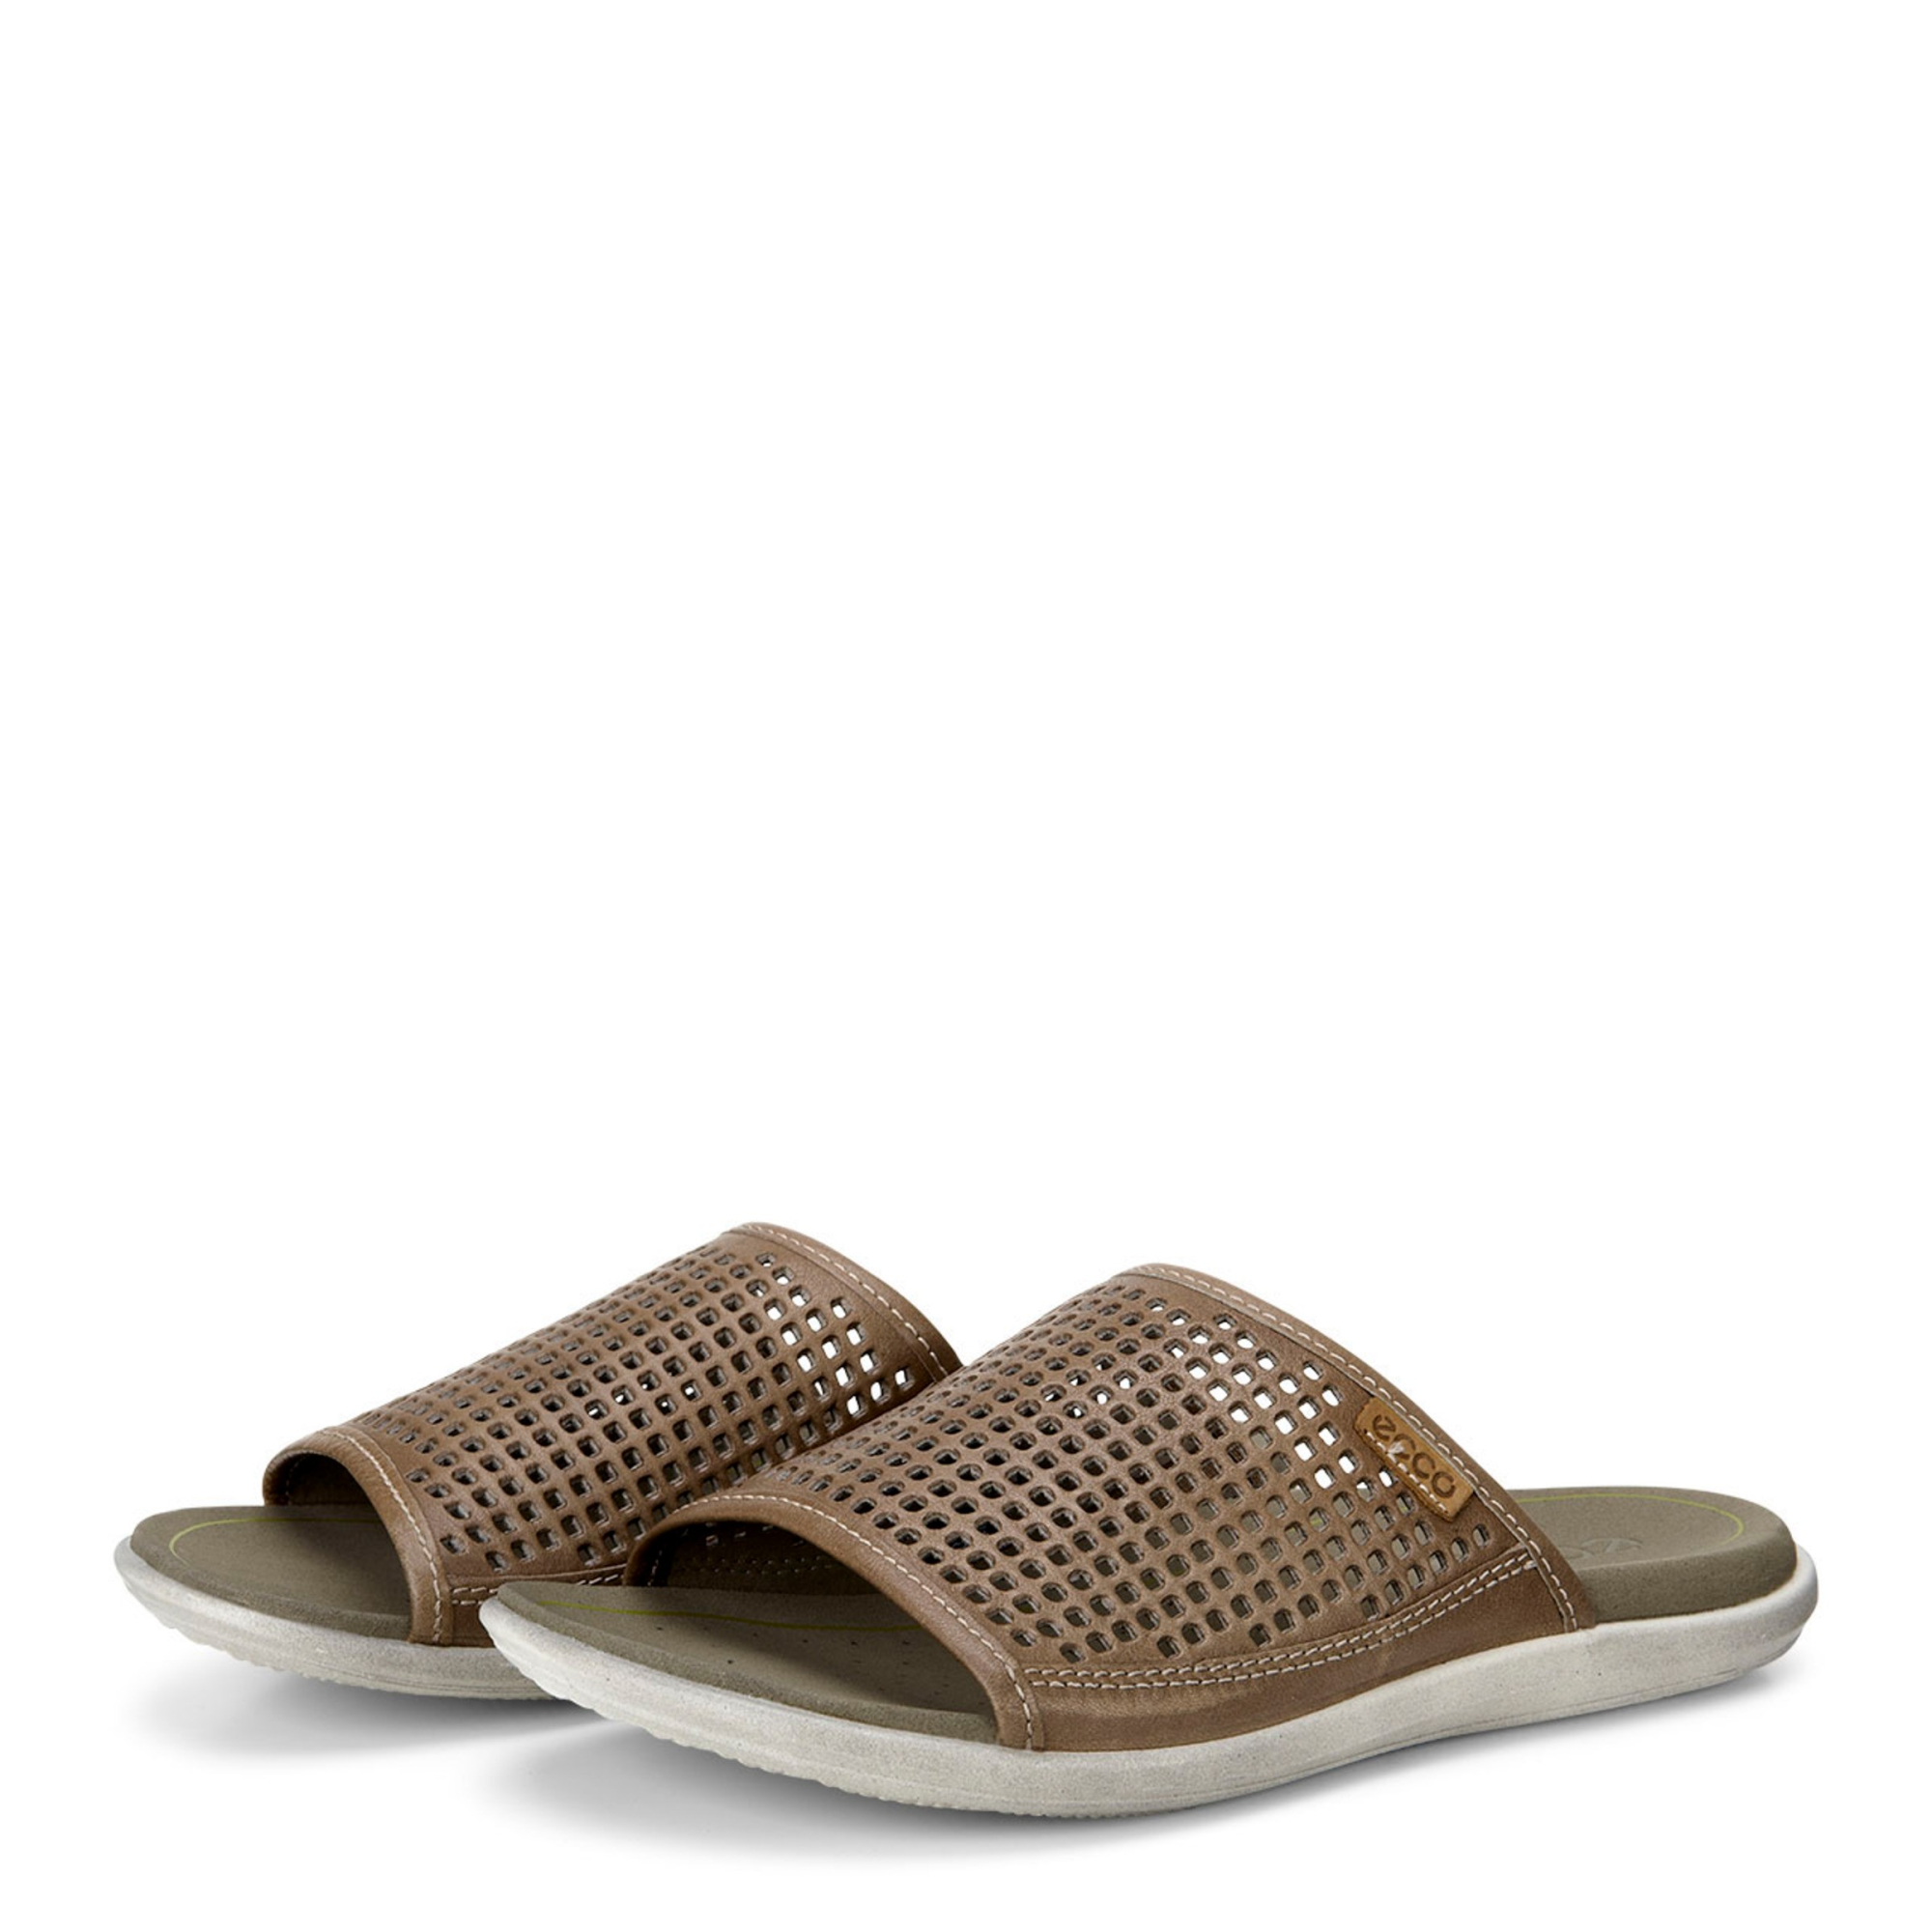 Ecco Sandal - Products - Veryk Mall - Veryk Mall, many product, quick response, your money!